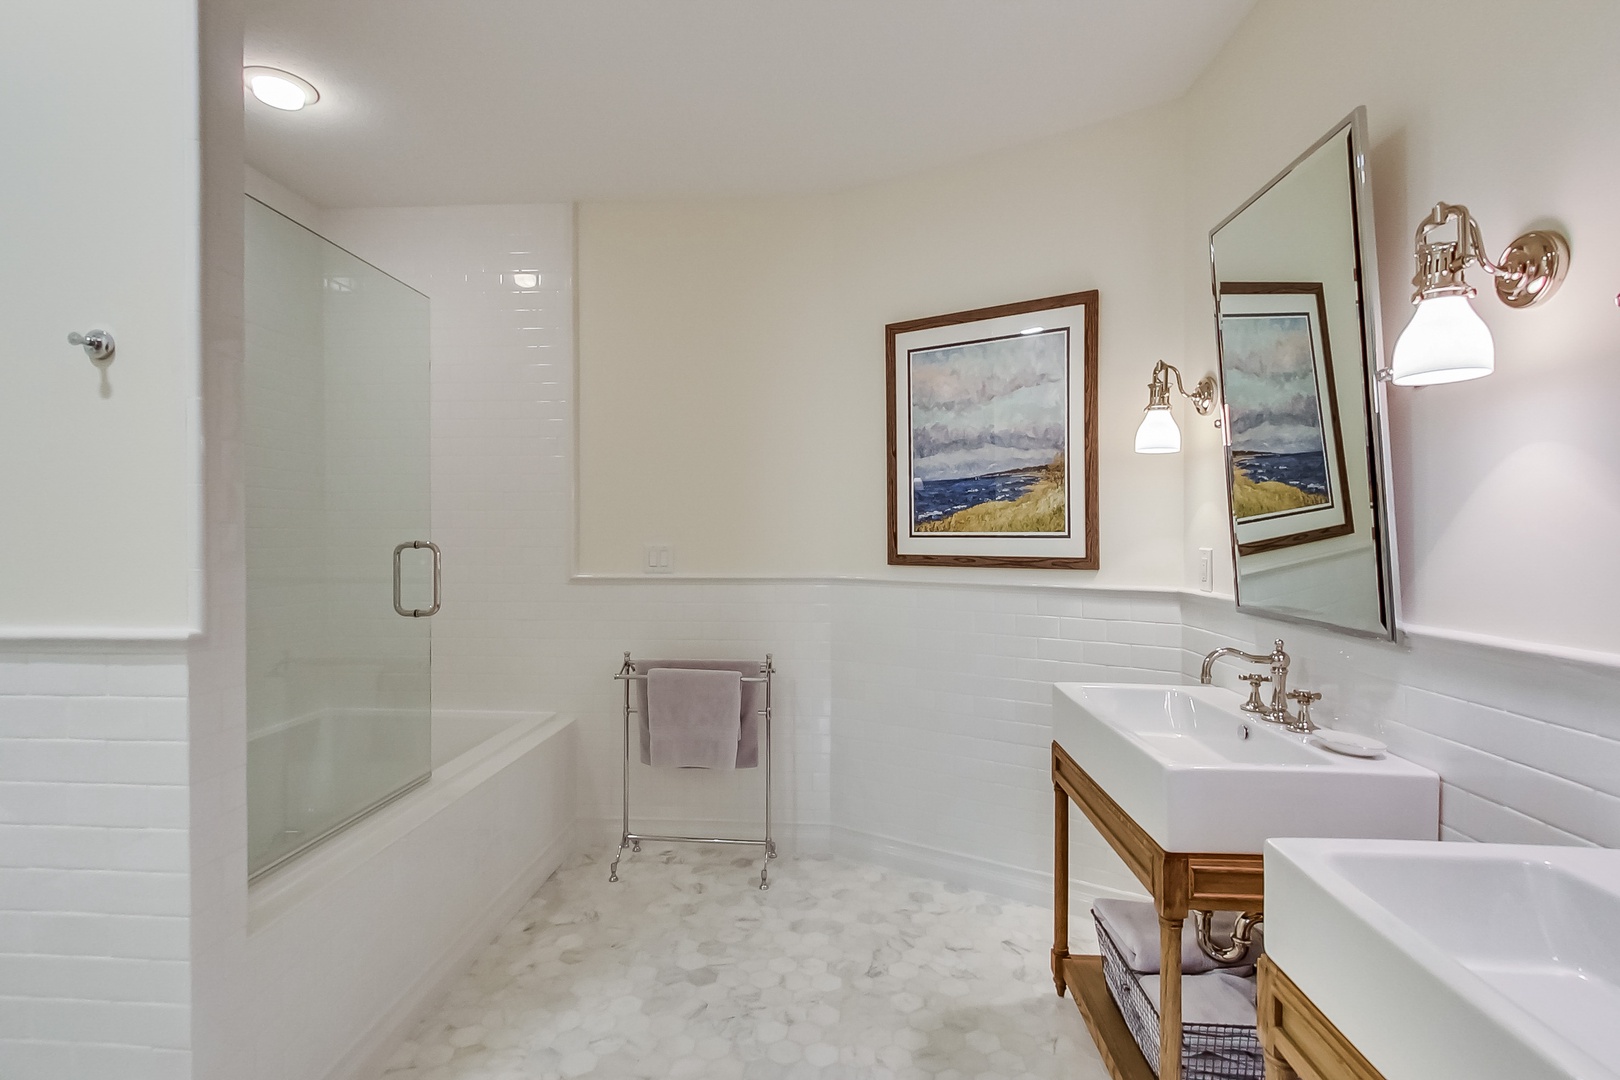 Want to take a relaxing bath? This bathroom has a soaking tub and tiled shower.